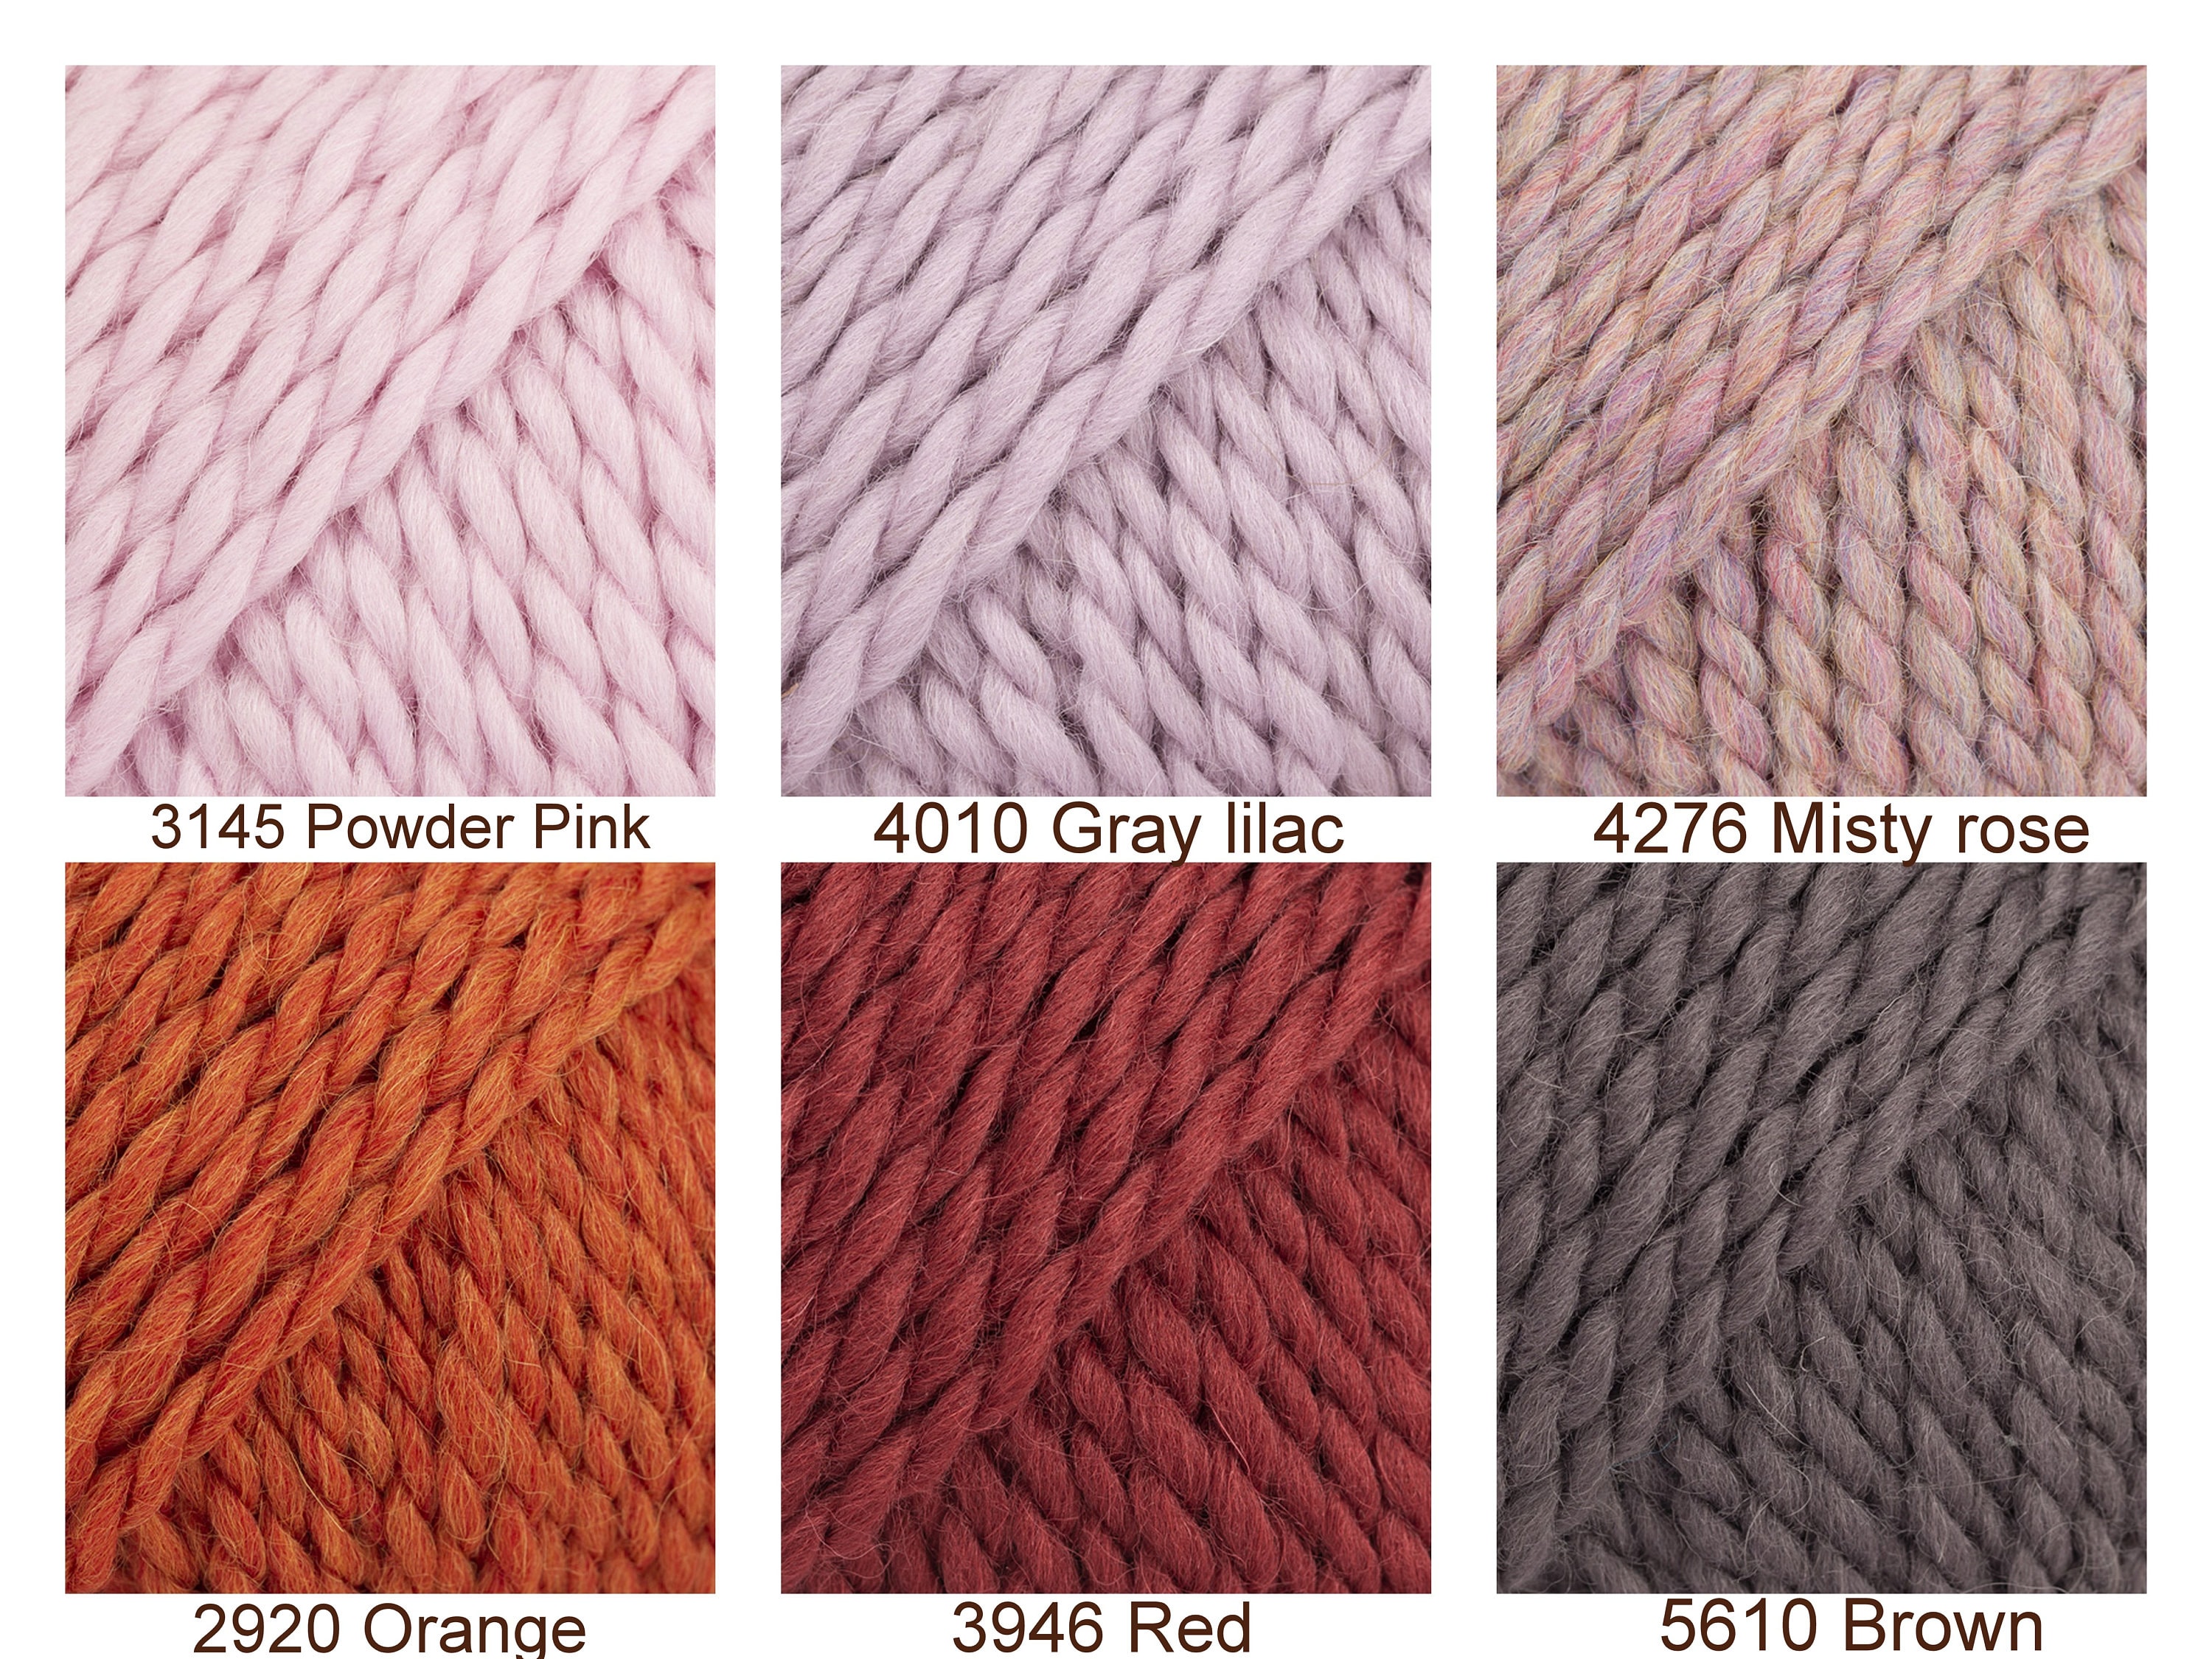 Drops Air is basically like knitting with cotton candy. Details in